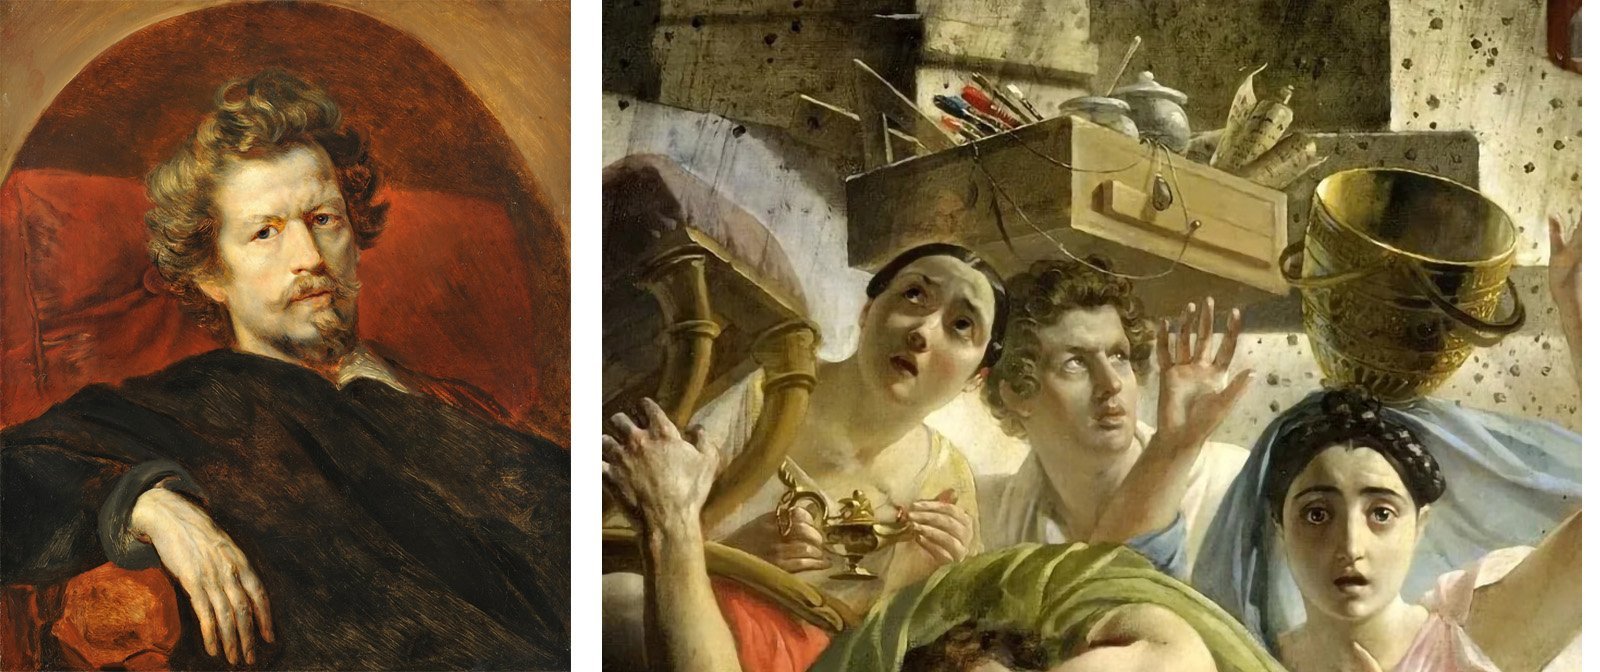 Critics mercilessly criticized Karl Bryullov's painting "The Last Day of Pompeii", what was wrong with it?